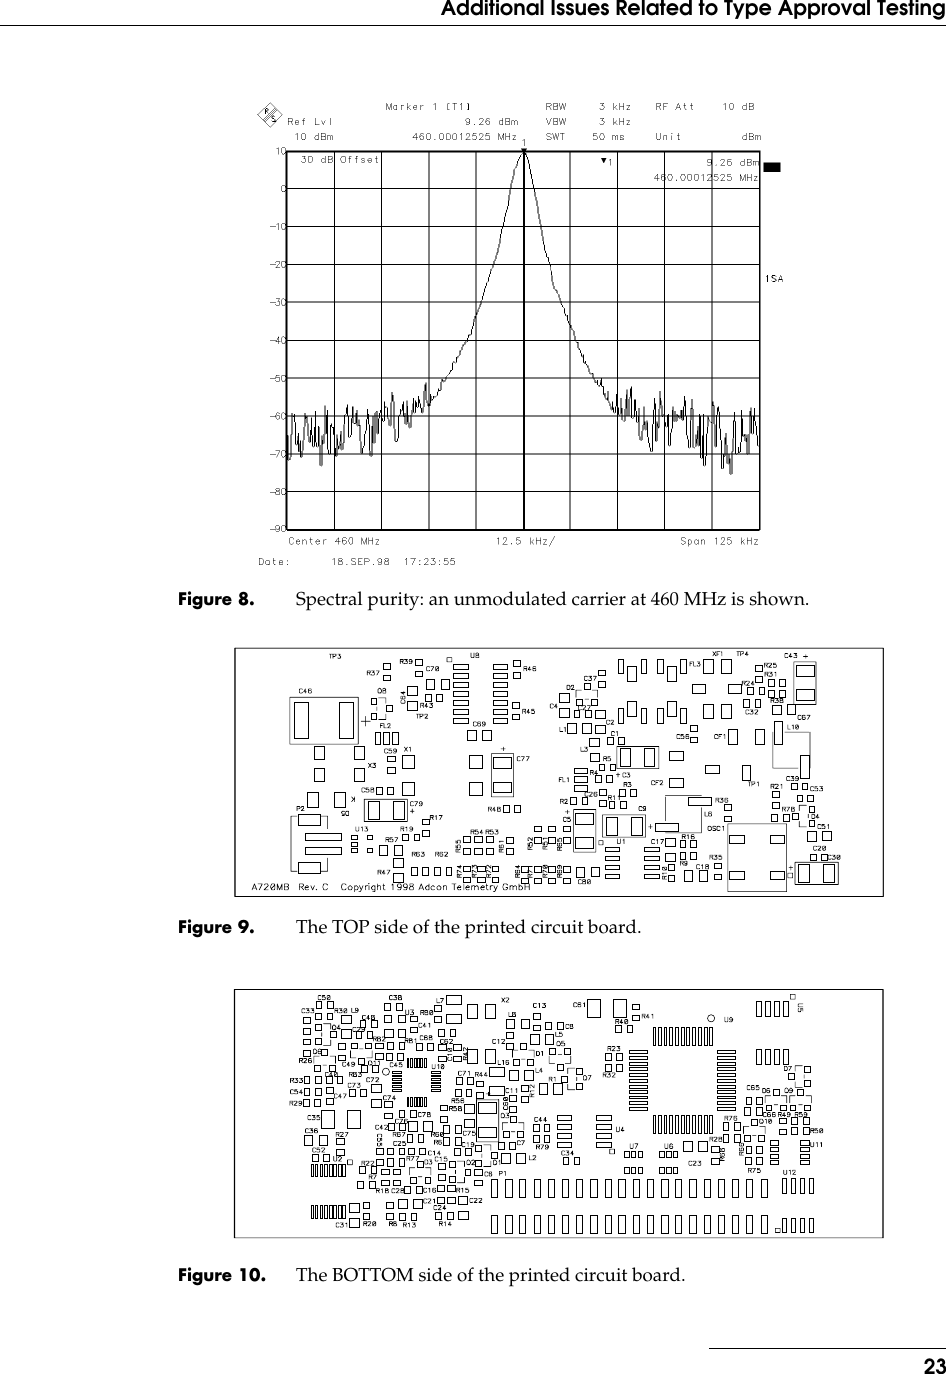 23Additional Issues Related to Type Approval TestingFigure 8. Spectral purity: an unmodulated carrier at 460 MHz is shown.Figure 9. The TOP side of the printed circuit board.Figure 10. The BOTTOM side of the printed circuit board.